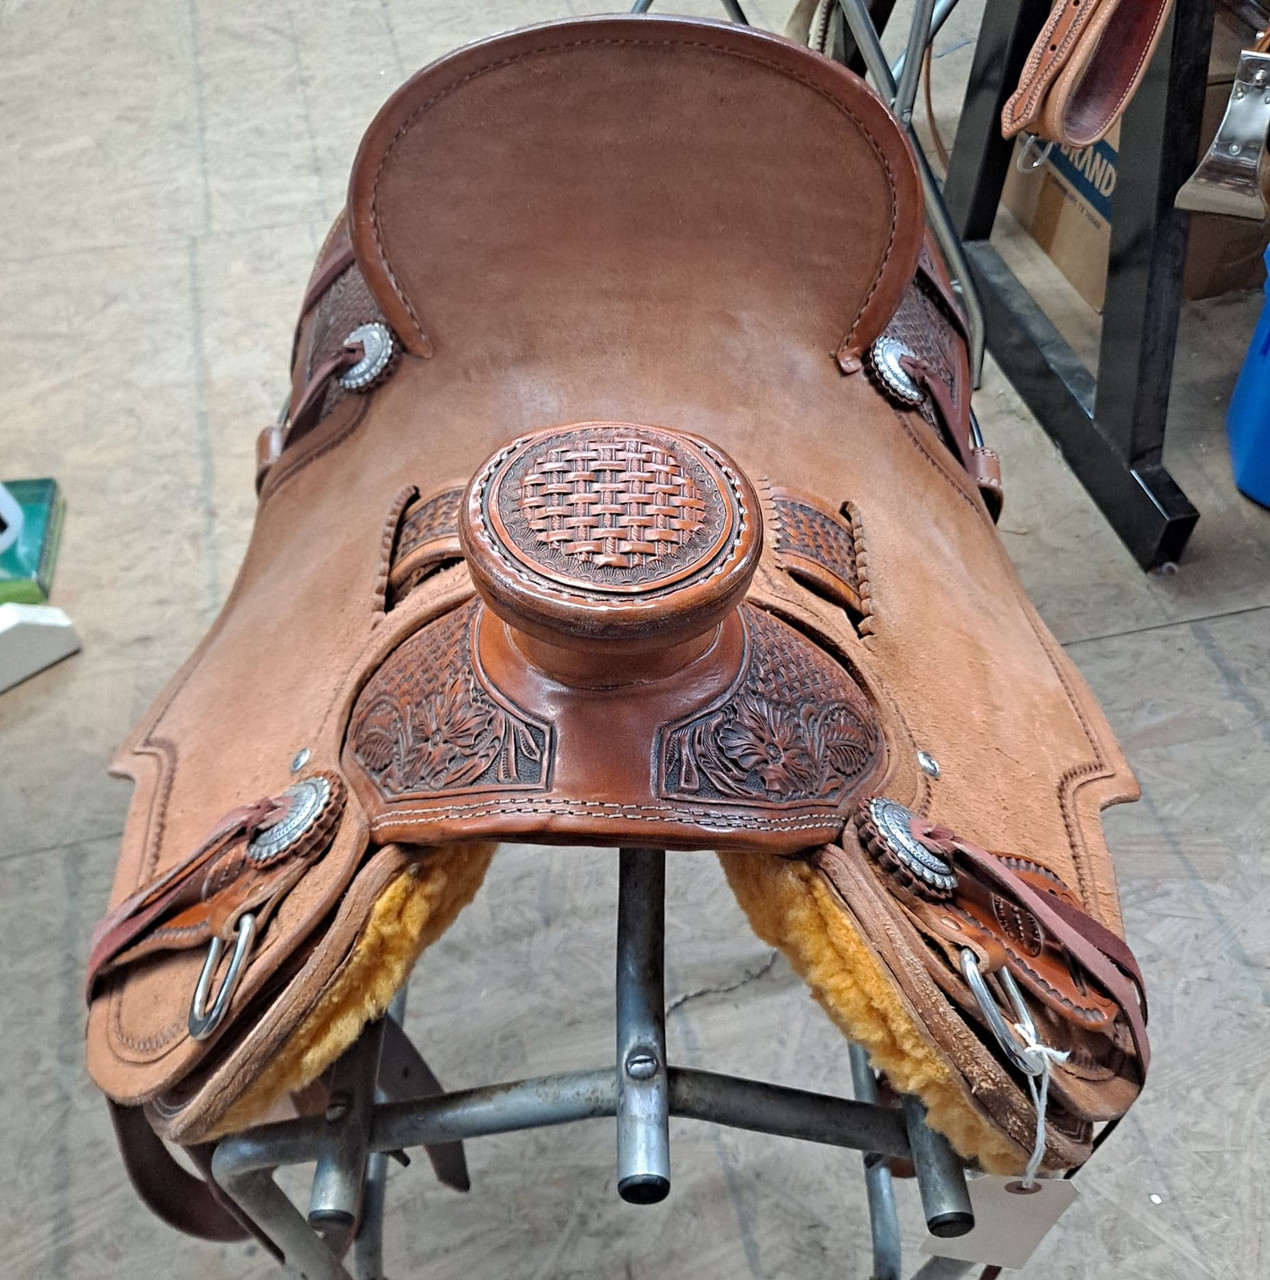 New Wade Saddle by Fort Worth Saddle Co with 16 inch seat. Hermann Oak leather in light oil antique. Tooled exposed stirrup leathers. Leather latigo and offside. Flank cinch included. Gullet size is 7 inch, weight is 38lbs, and skirt is 28.5 inch. Made in USA. Limited lifetime warranty.

S1302